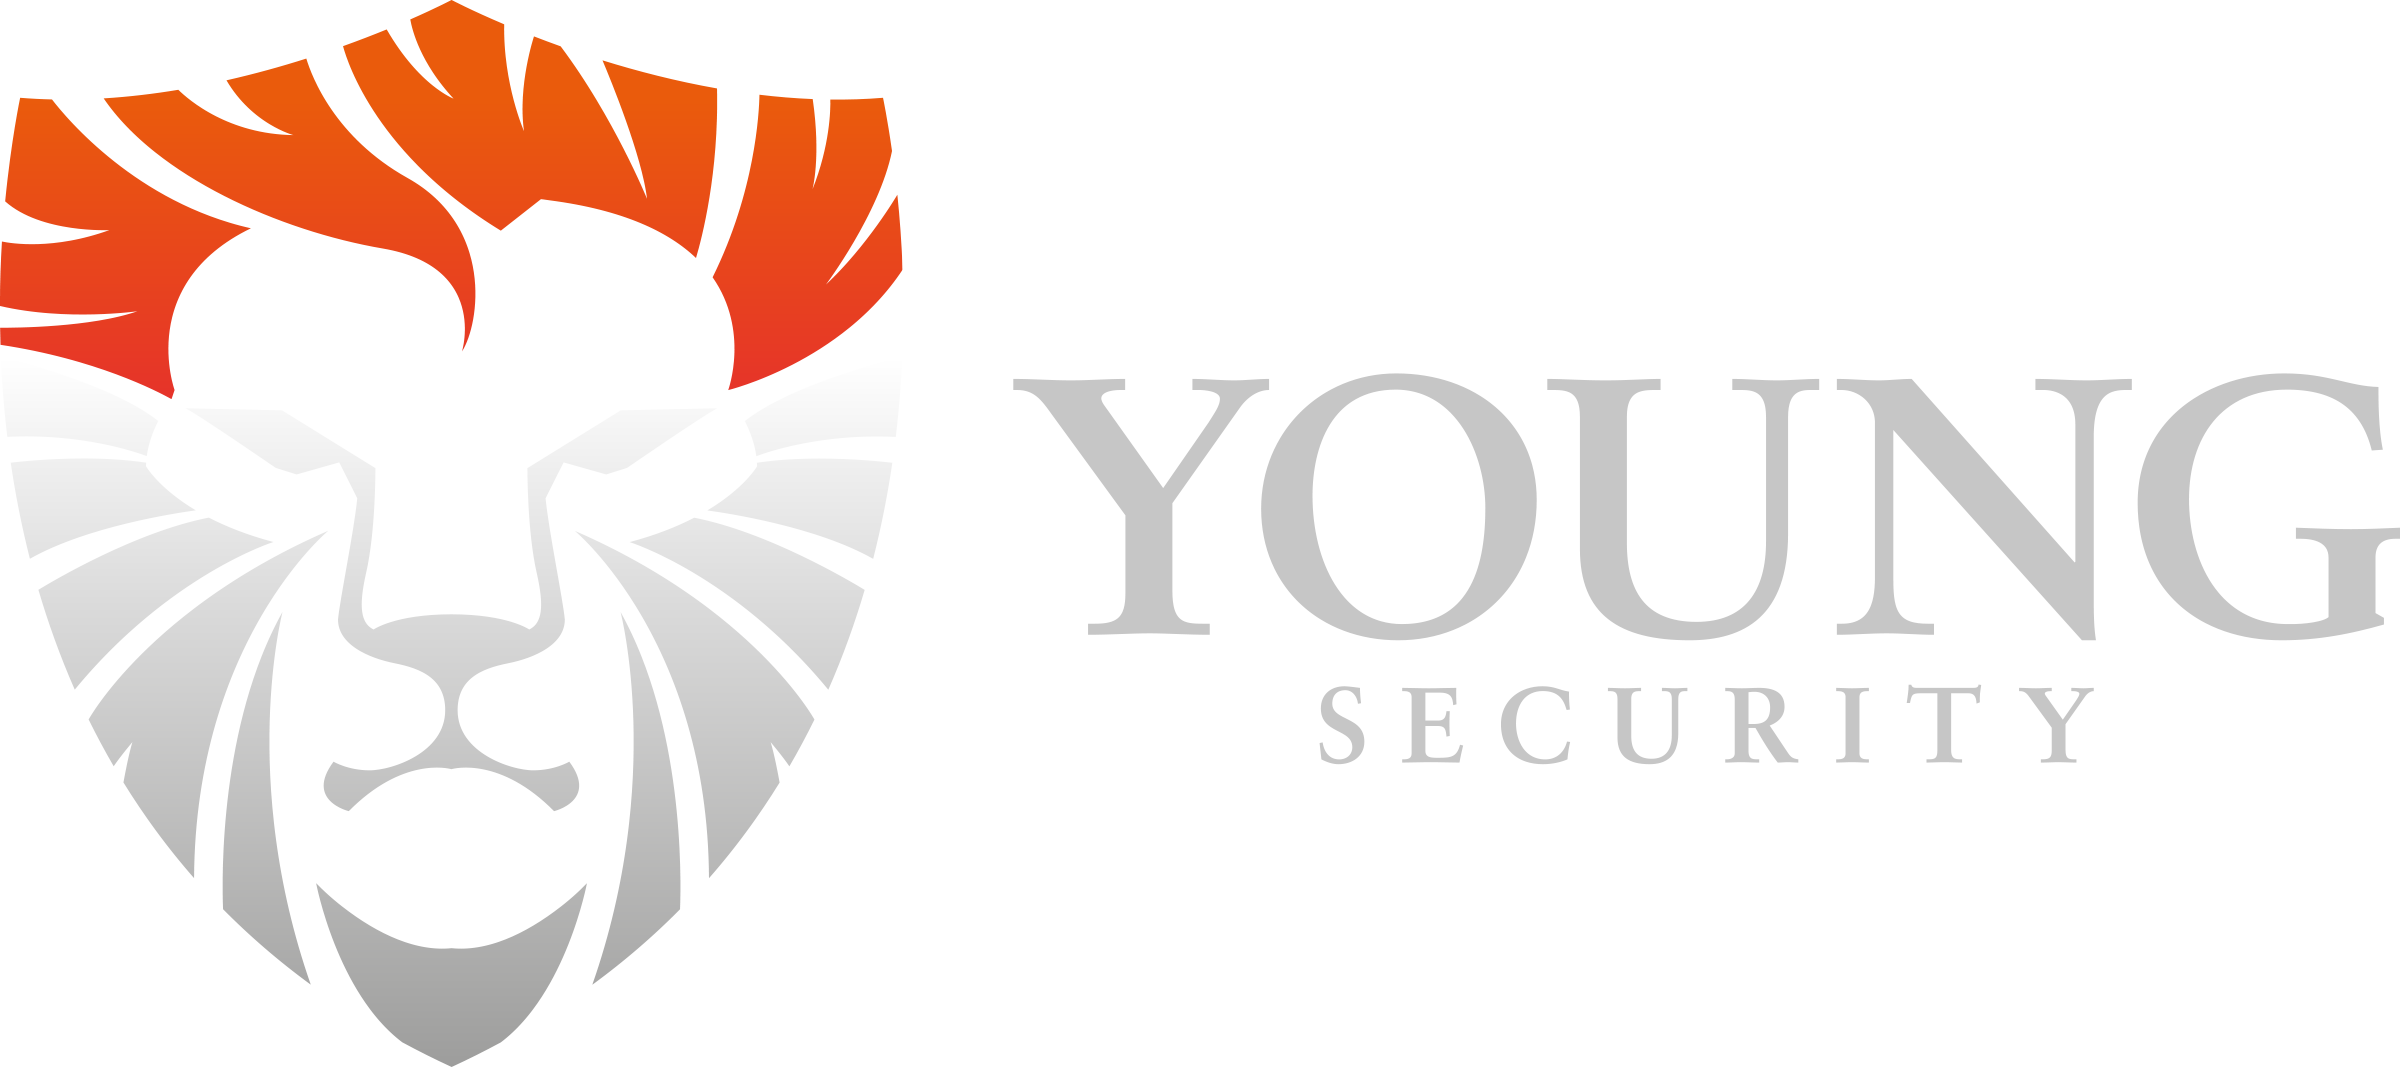 LOGO_YOUNG_SECURITY_CORPORATE_Landscape_DIA_RGB